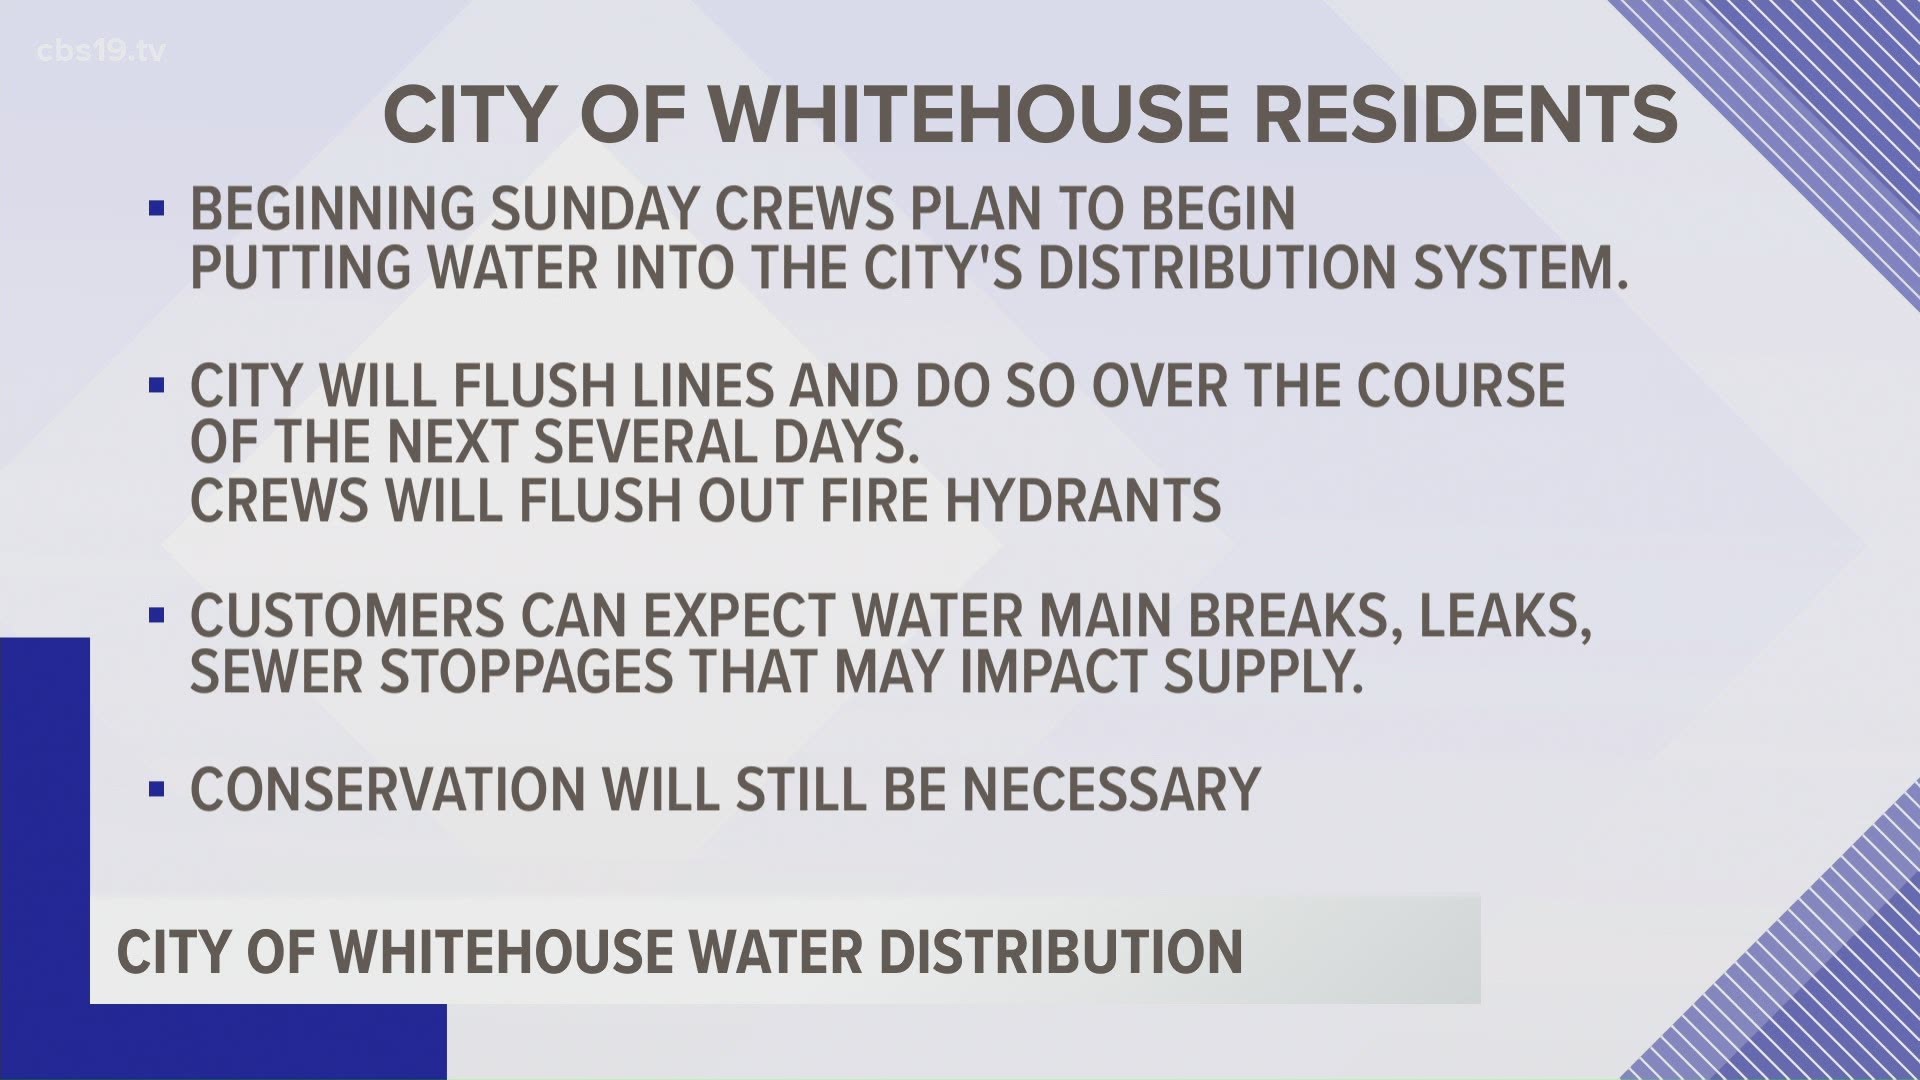 The city is hopeful boil water restrictions will be lifted next week.